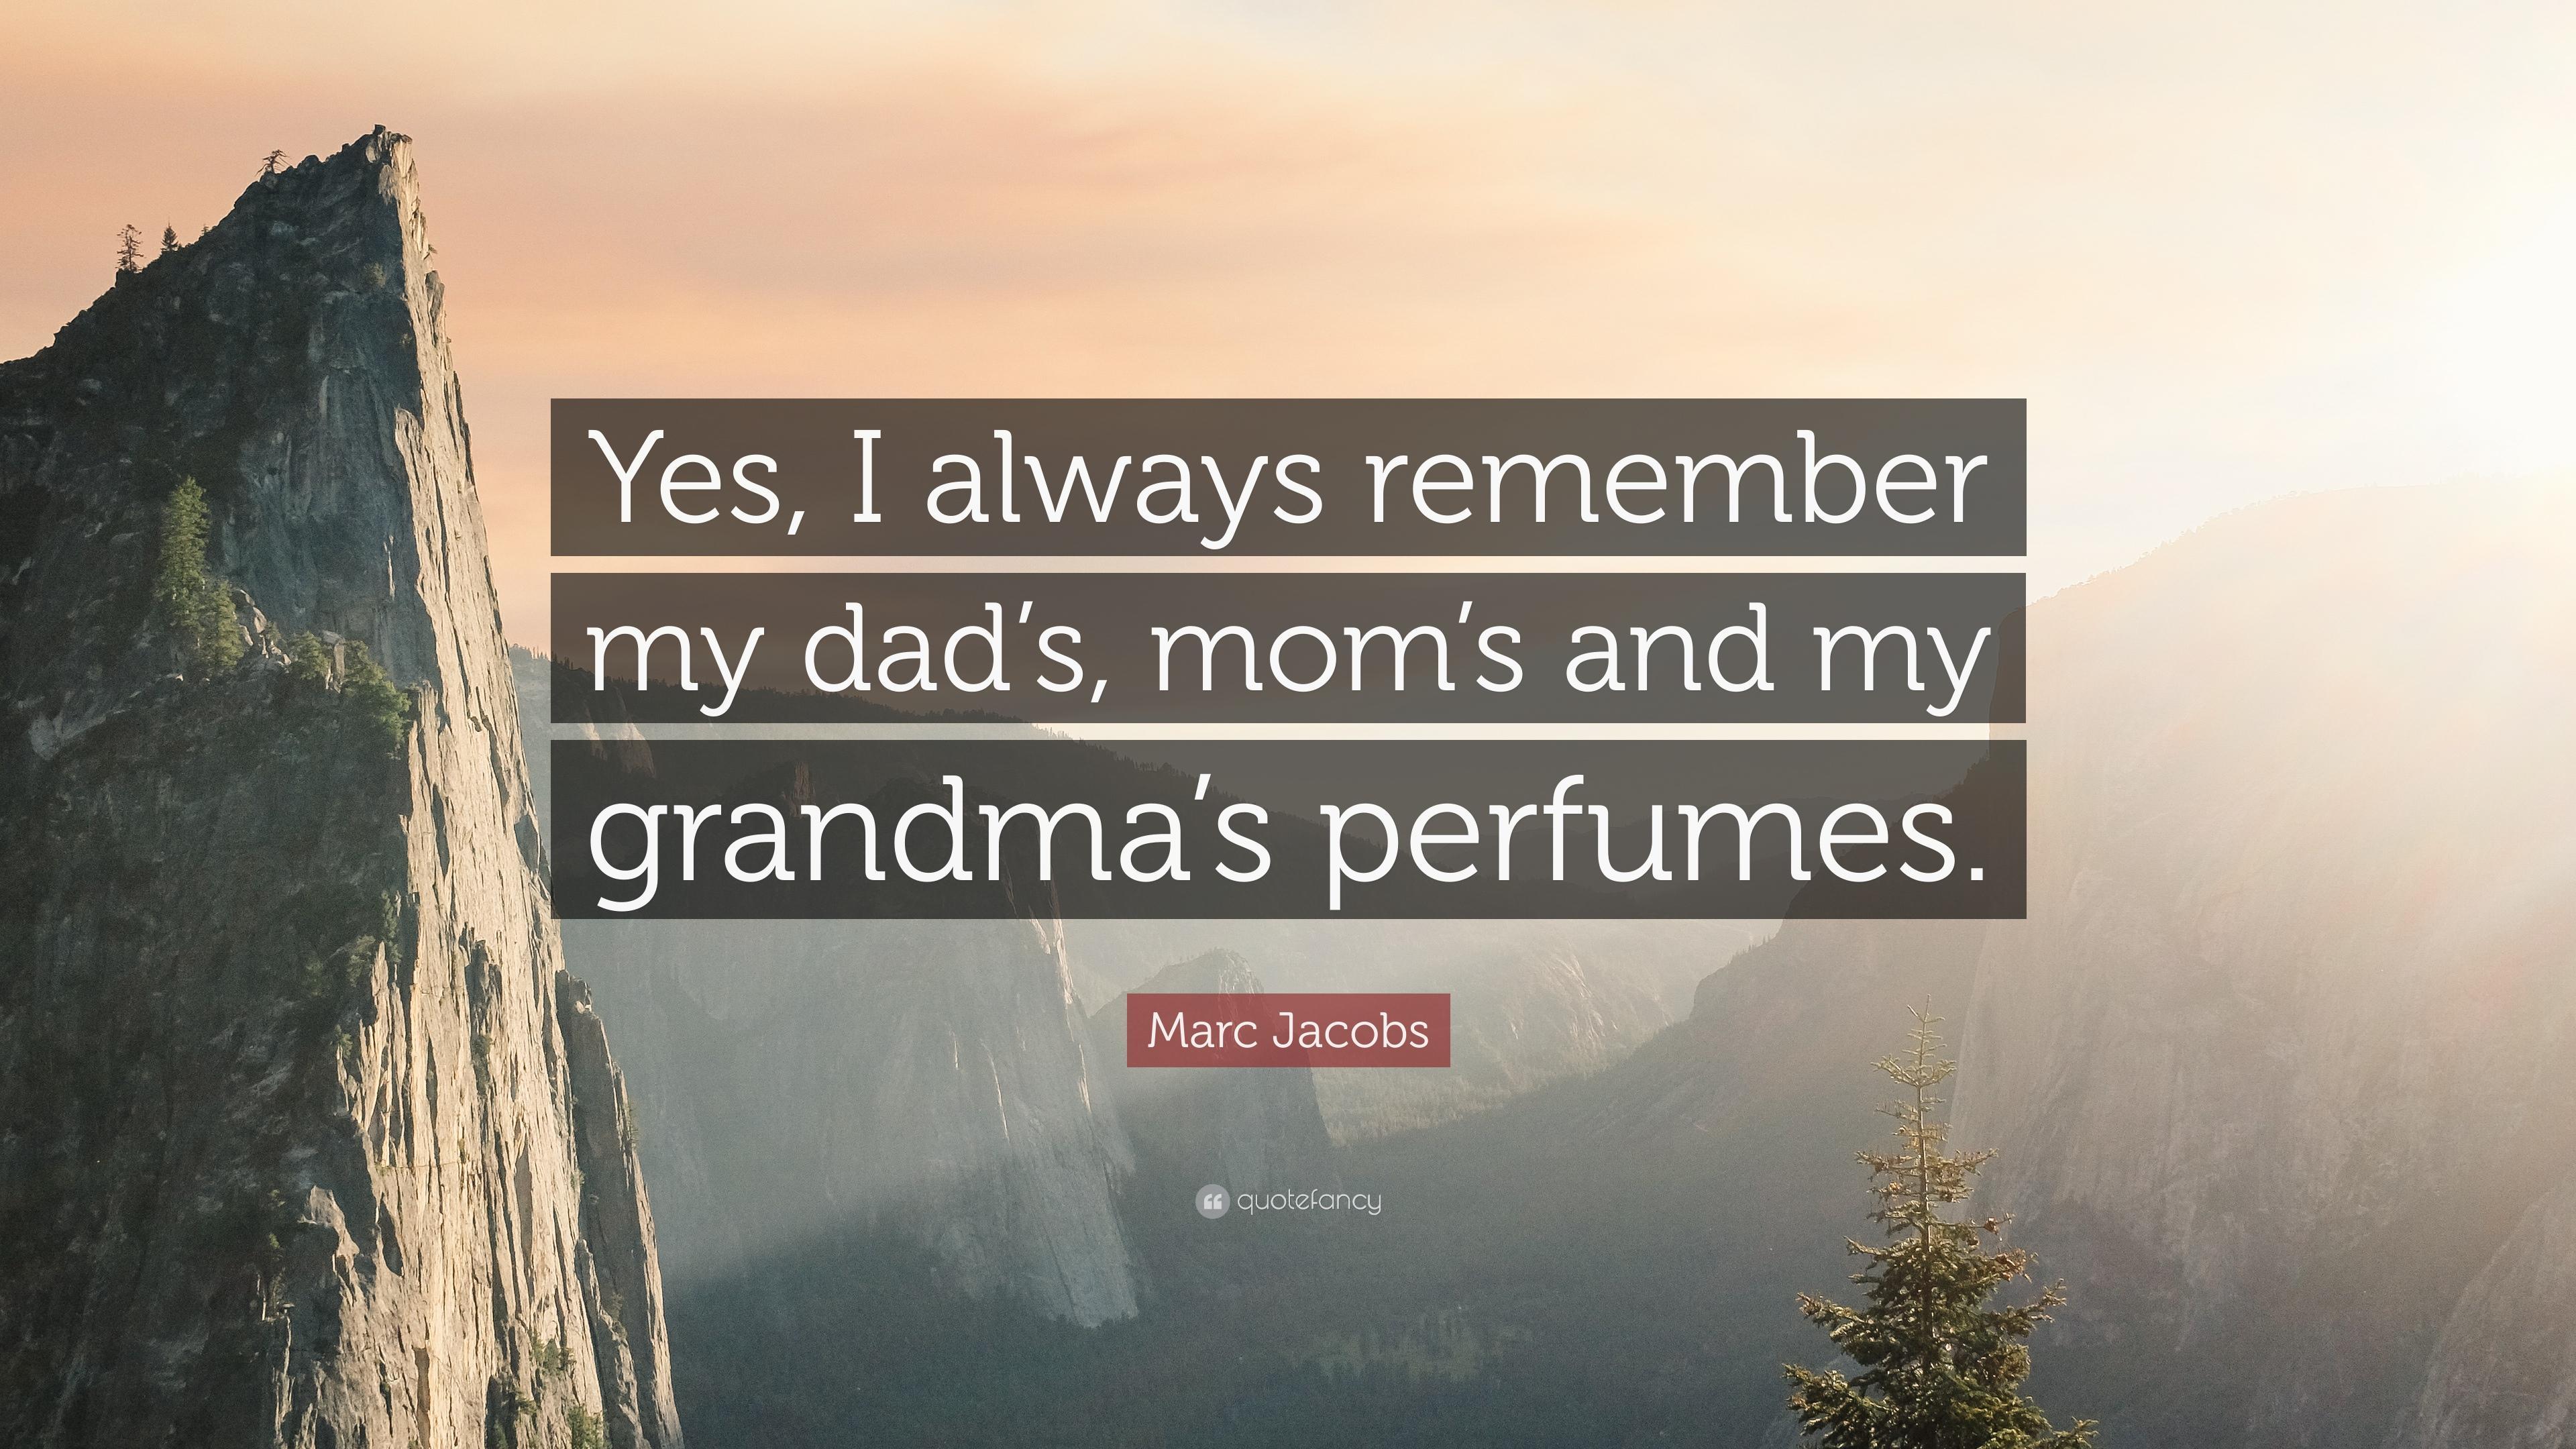 Marc Jacobs Quote: “Yes, I always remember my dad's, mom's